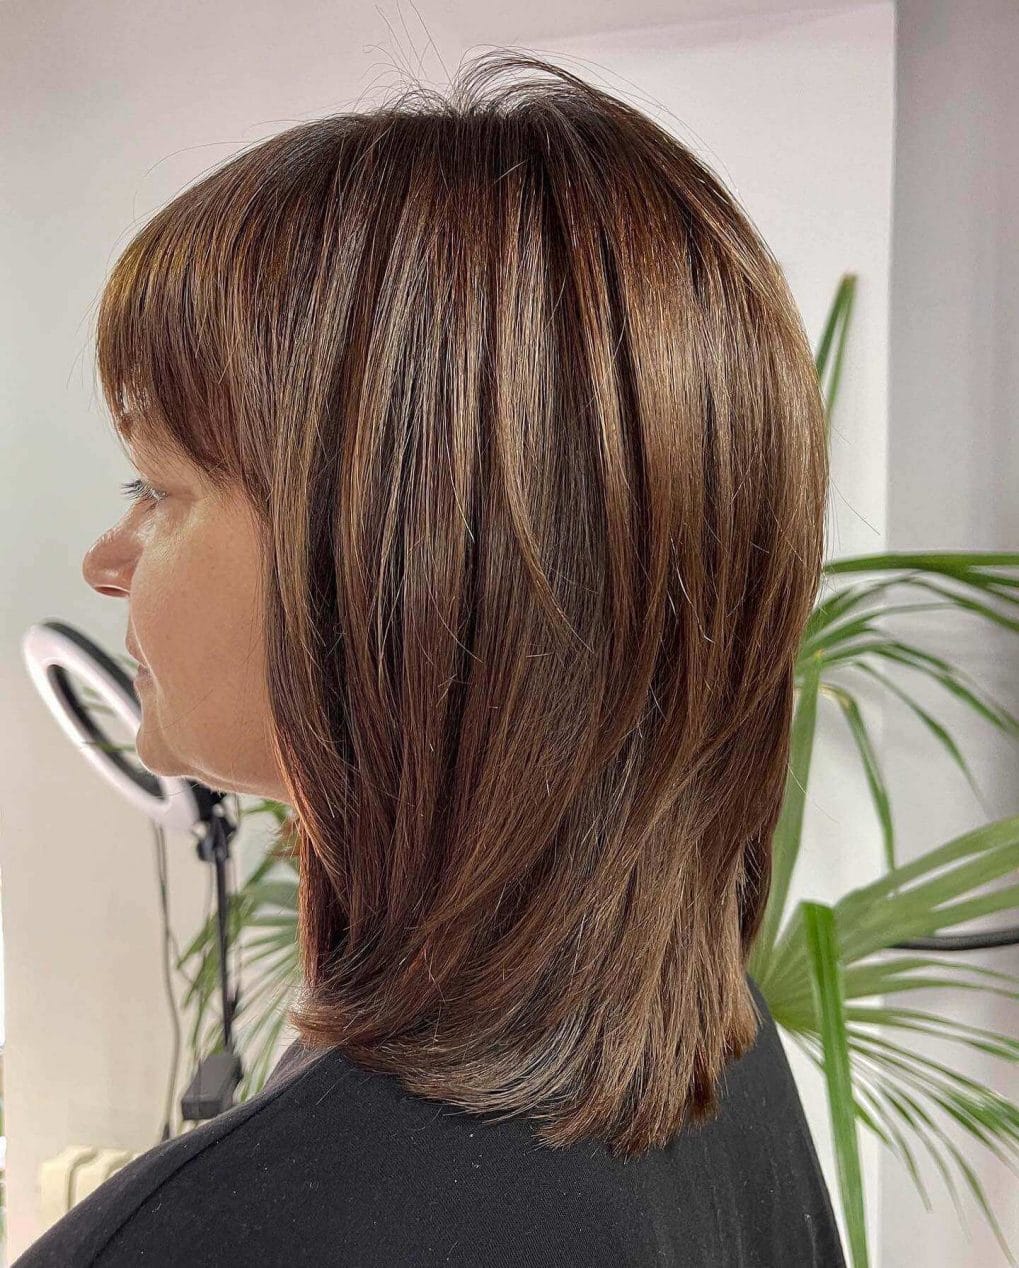 Chocolate brown, medium-length hair with subtle layers and light highlights.